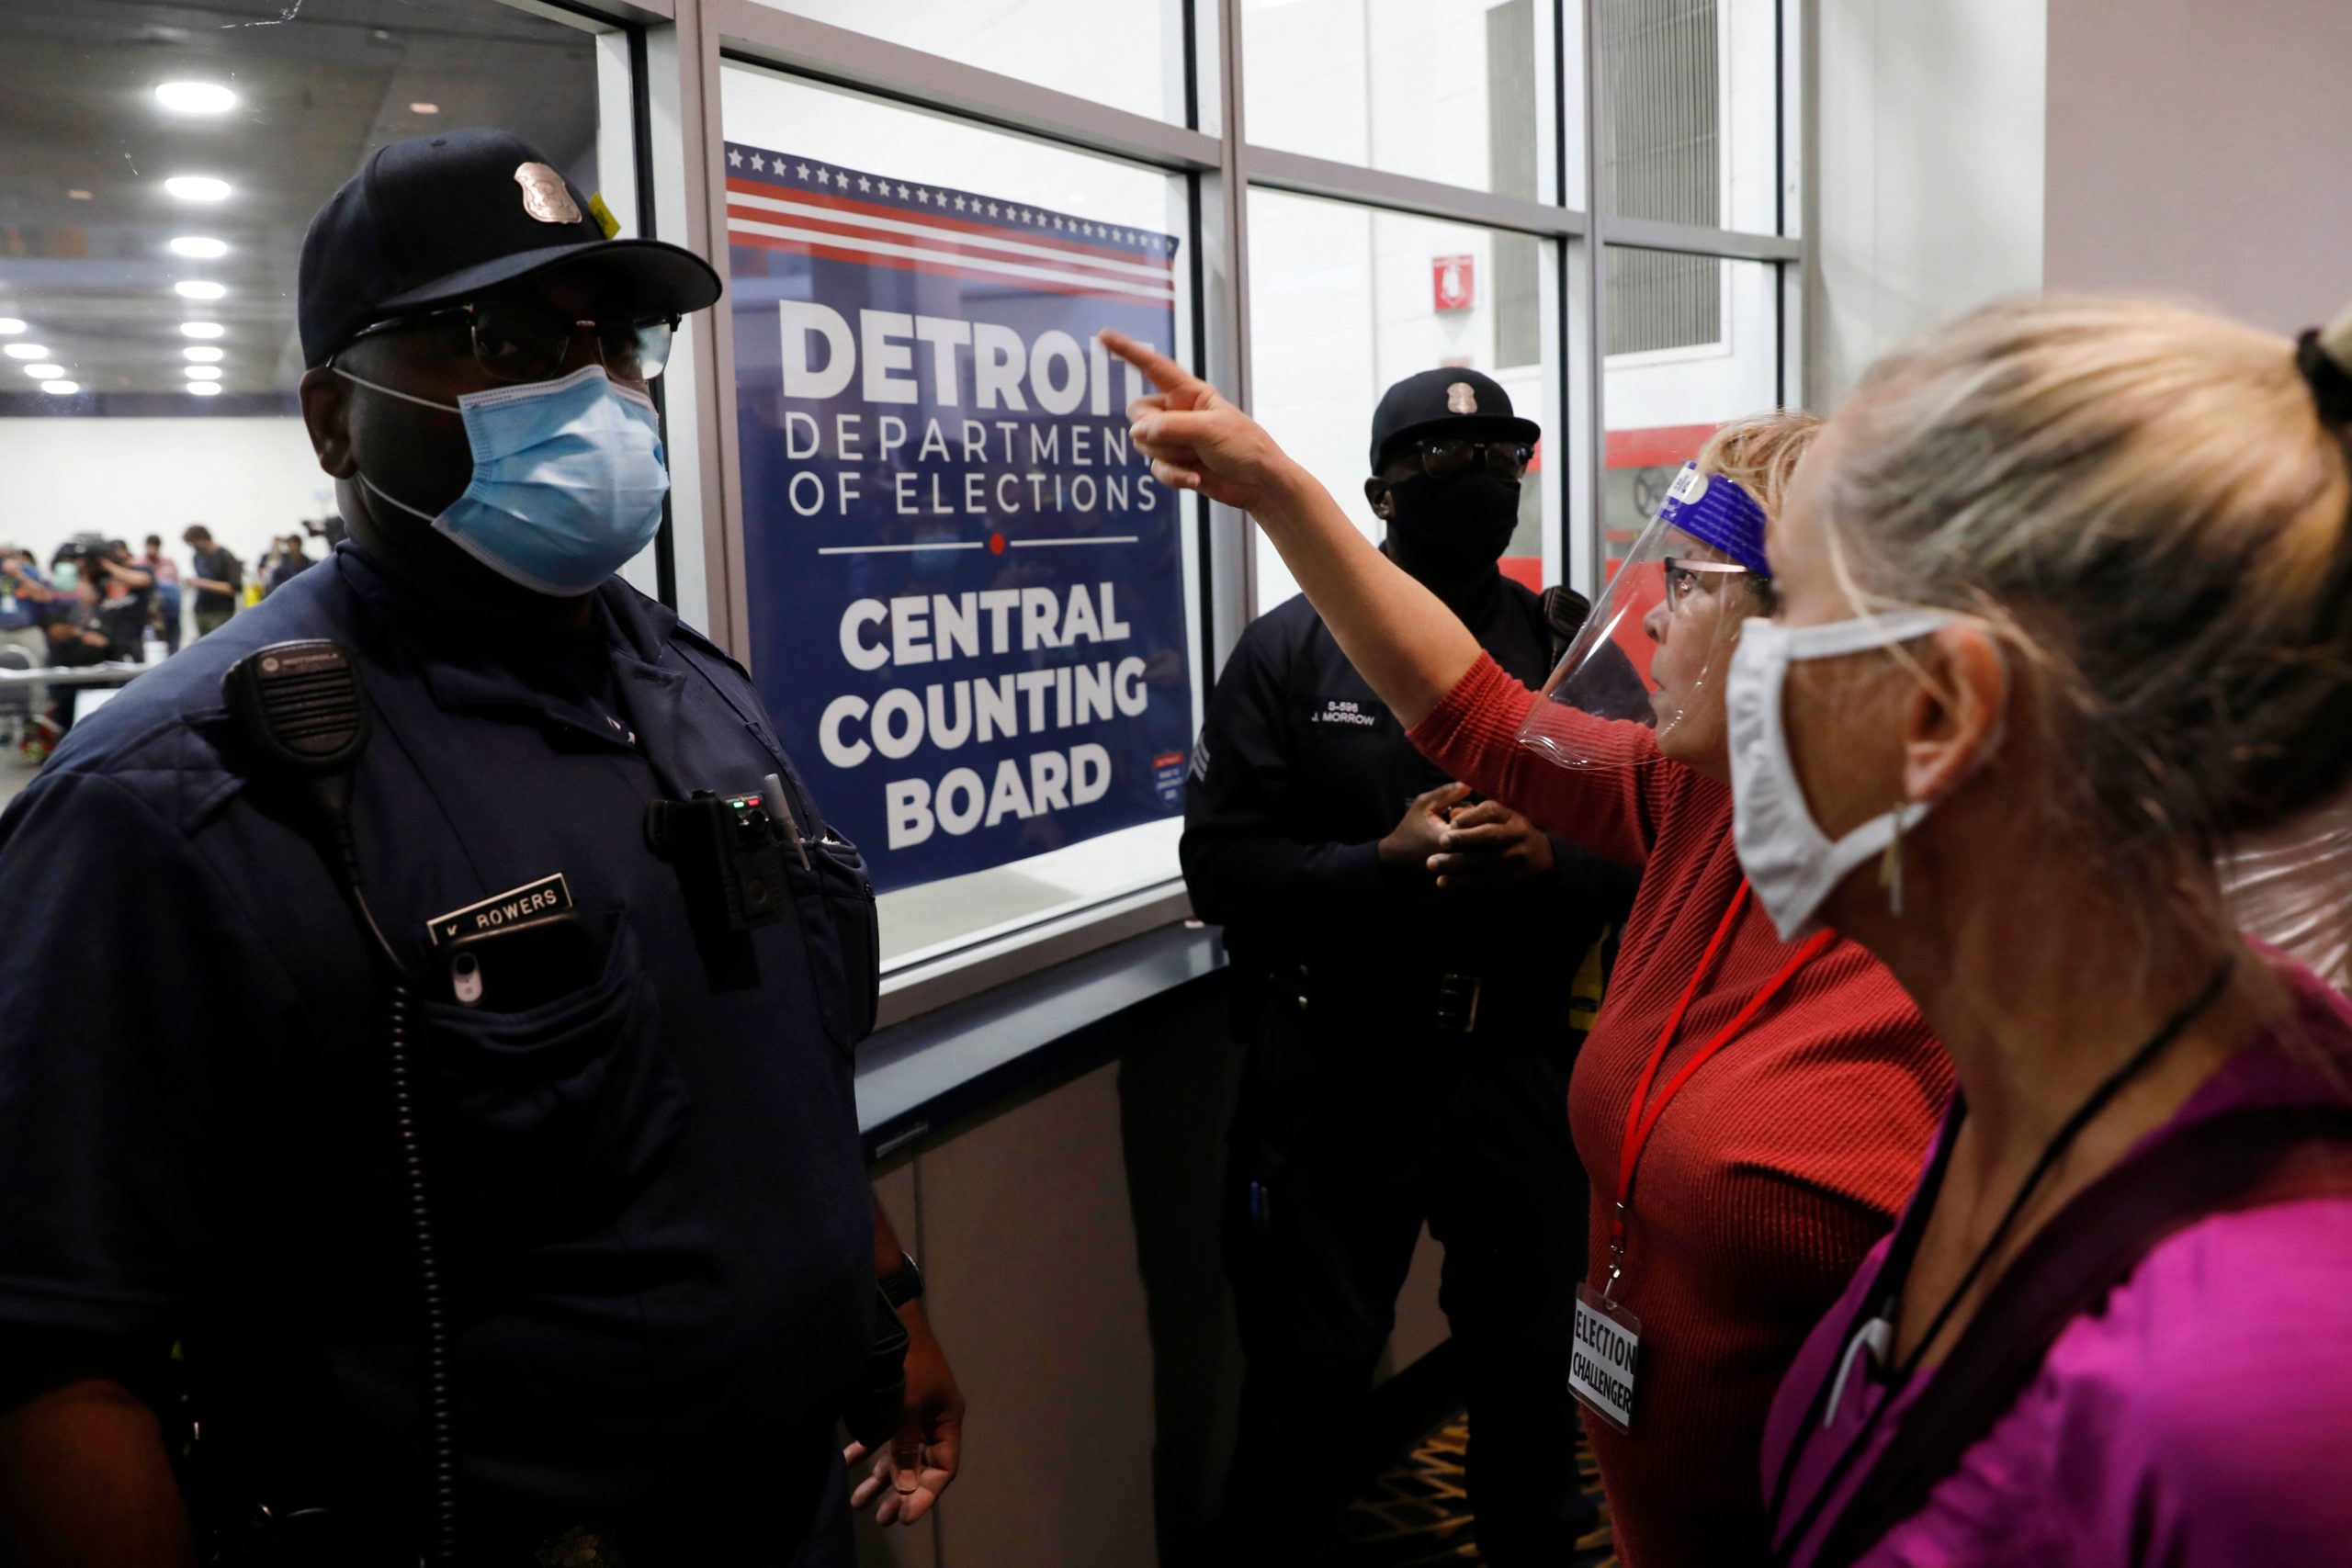 Police officers face supporters of Donald Trump as they chant slogans outside the room where absentee ballots for the 2020 general election are being counted at TCF Center on November 4, 2020 in Detroit, Michigan.